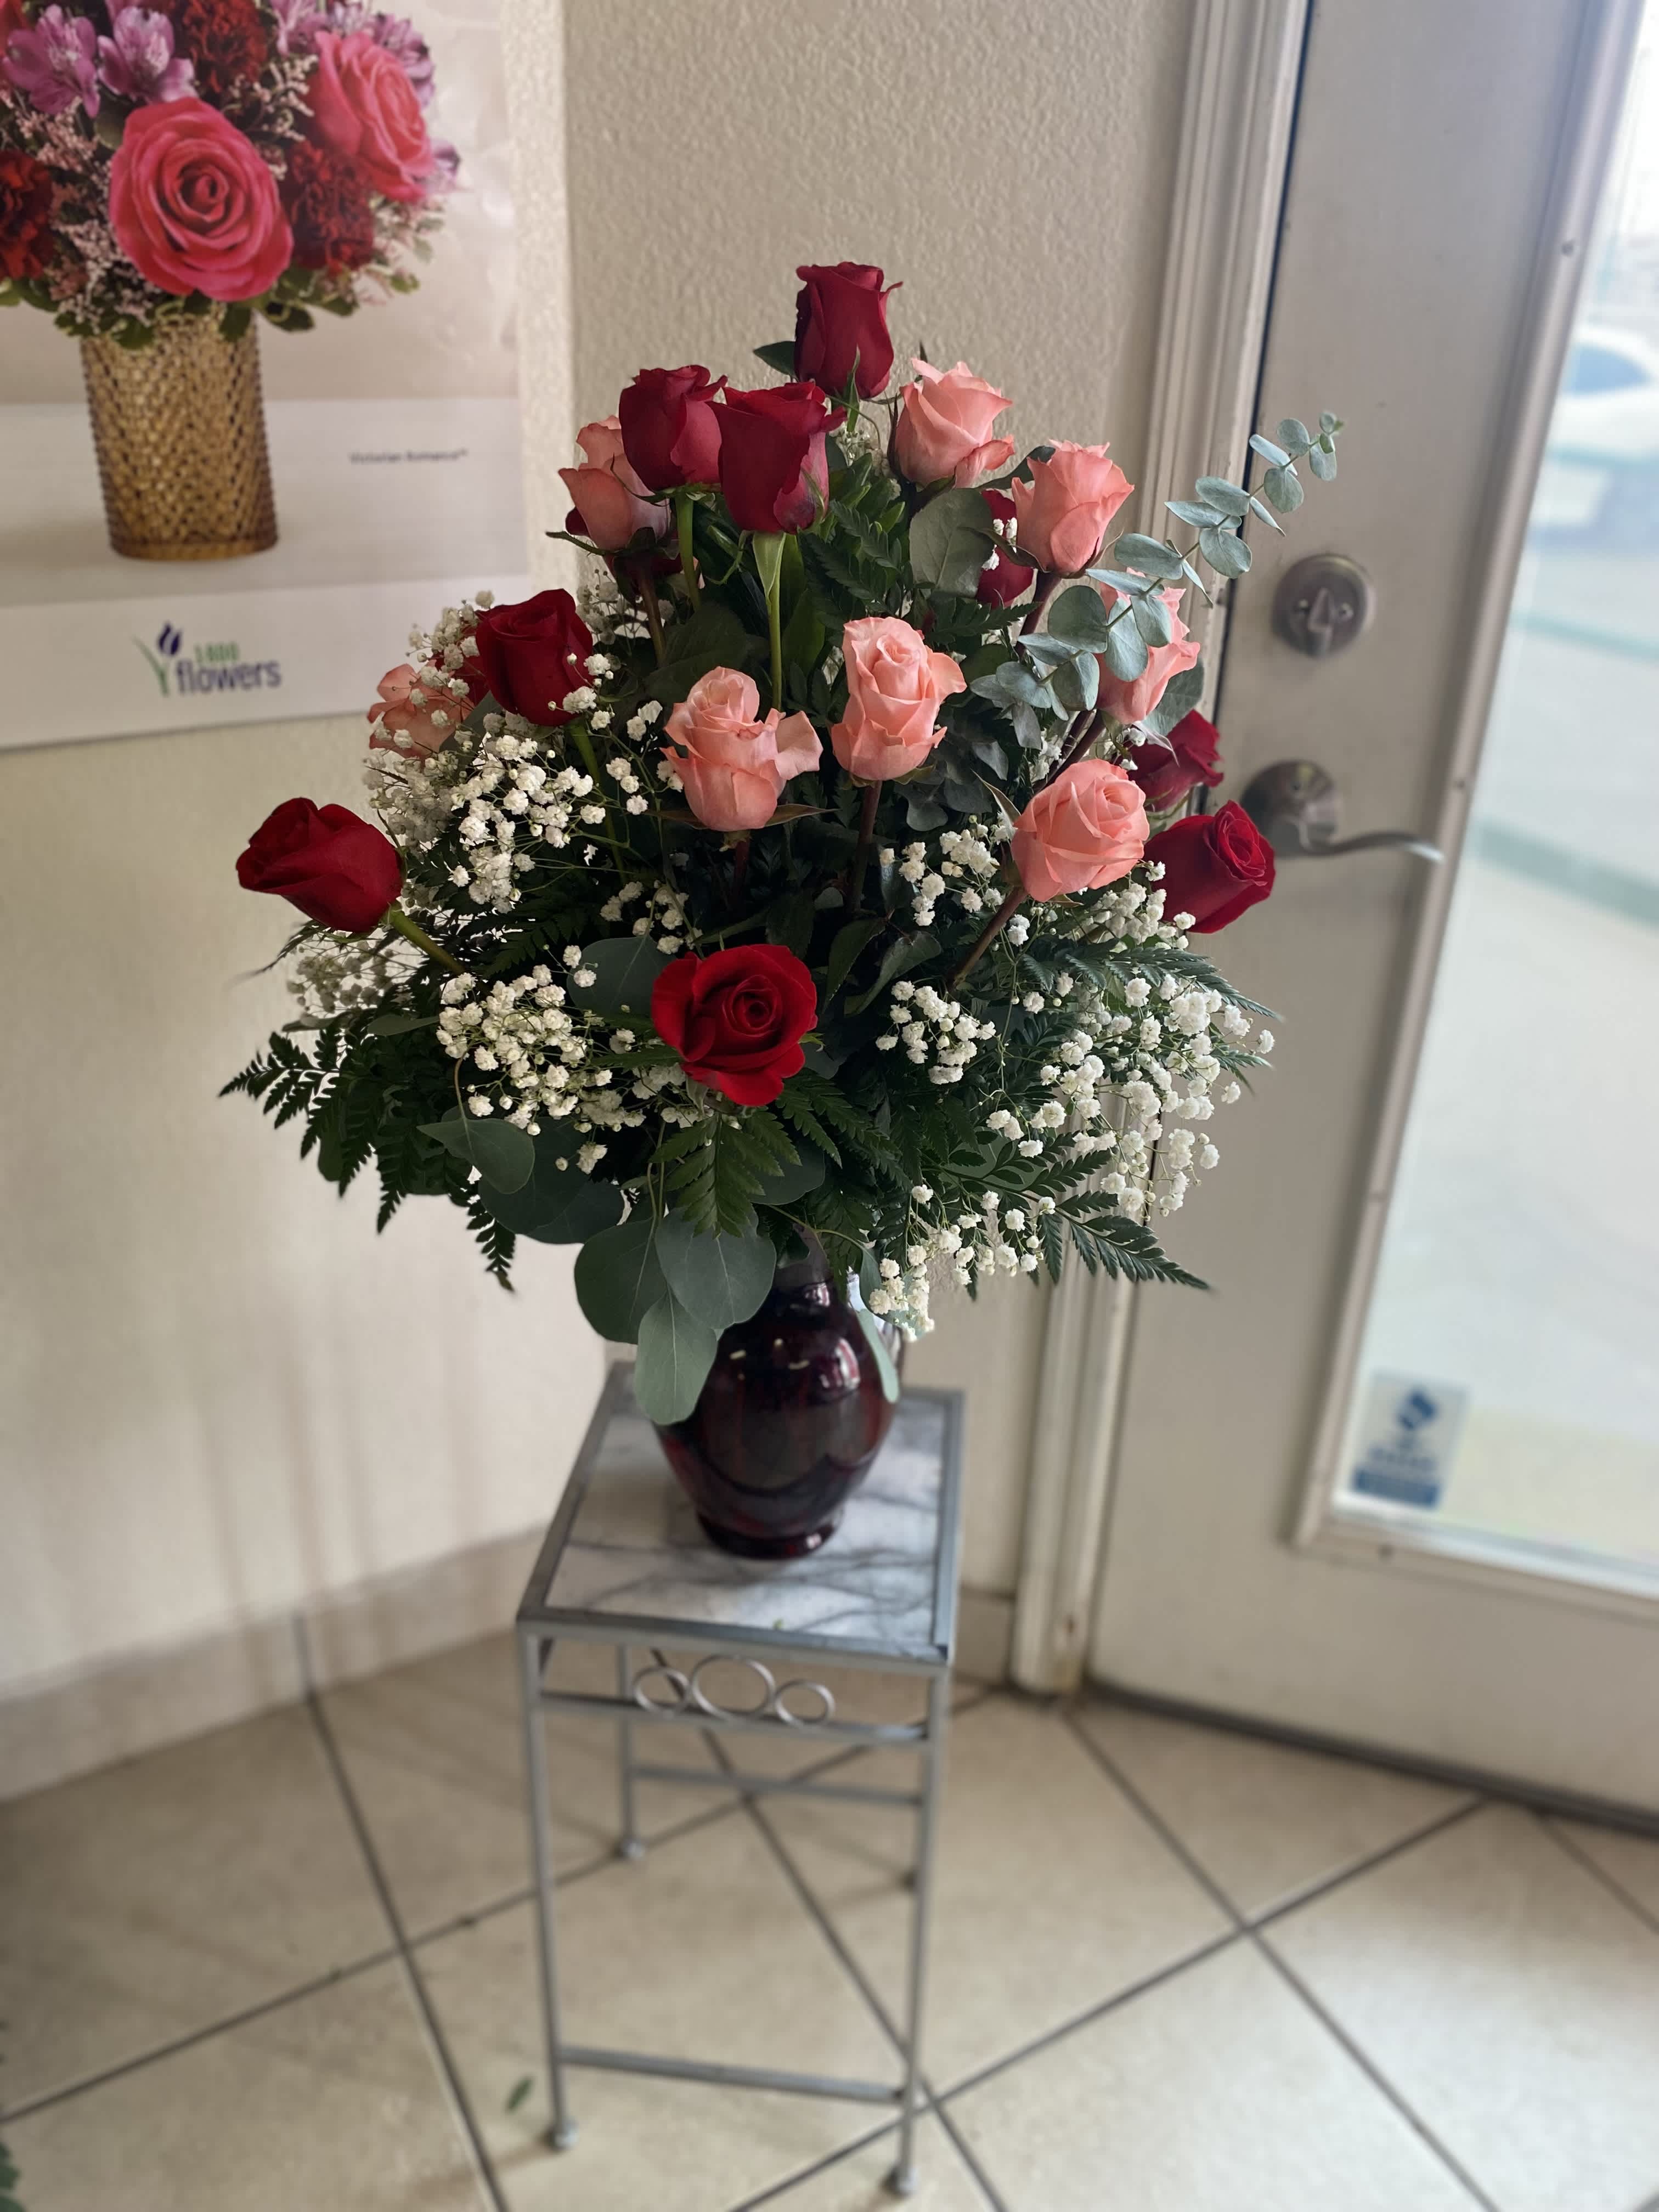 24 Red and Pink Rose Arrangement - 24 red roses beautifully arranged in a clear vase. A